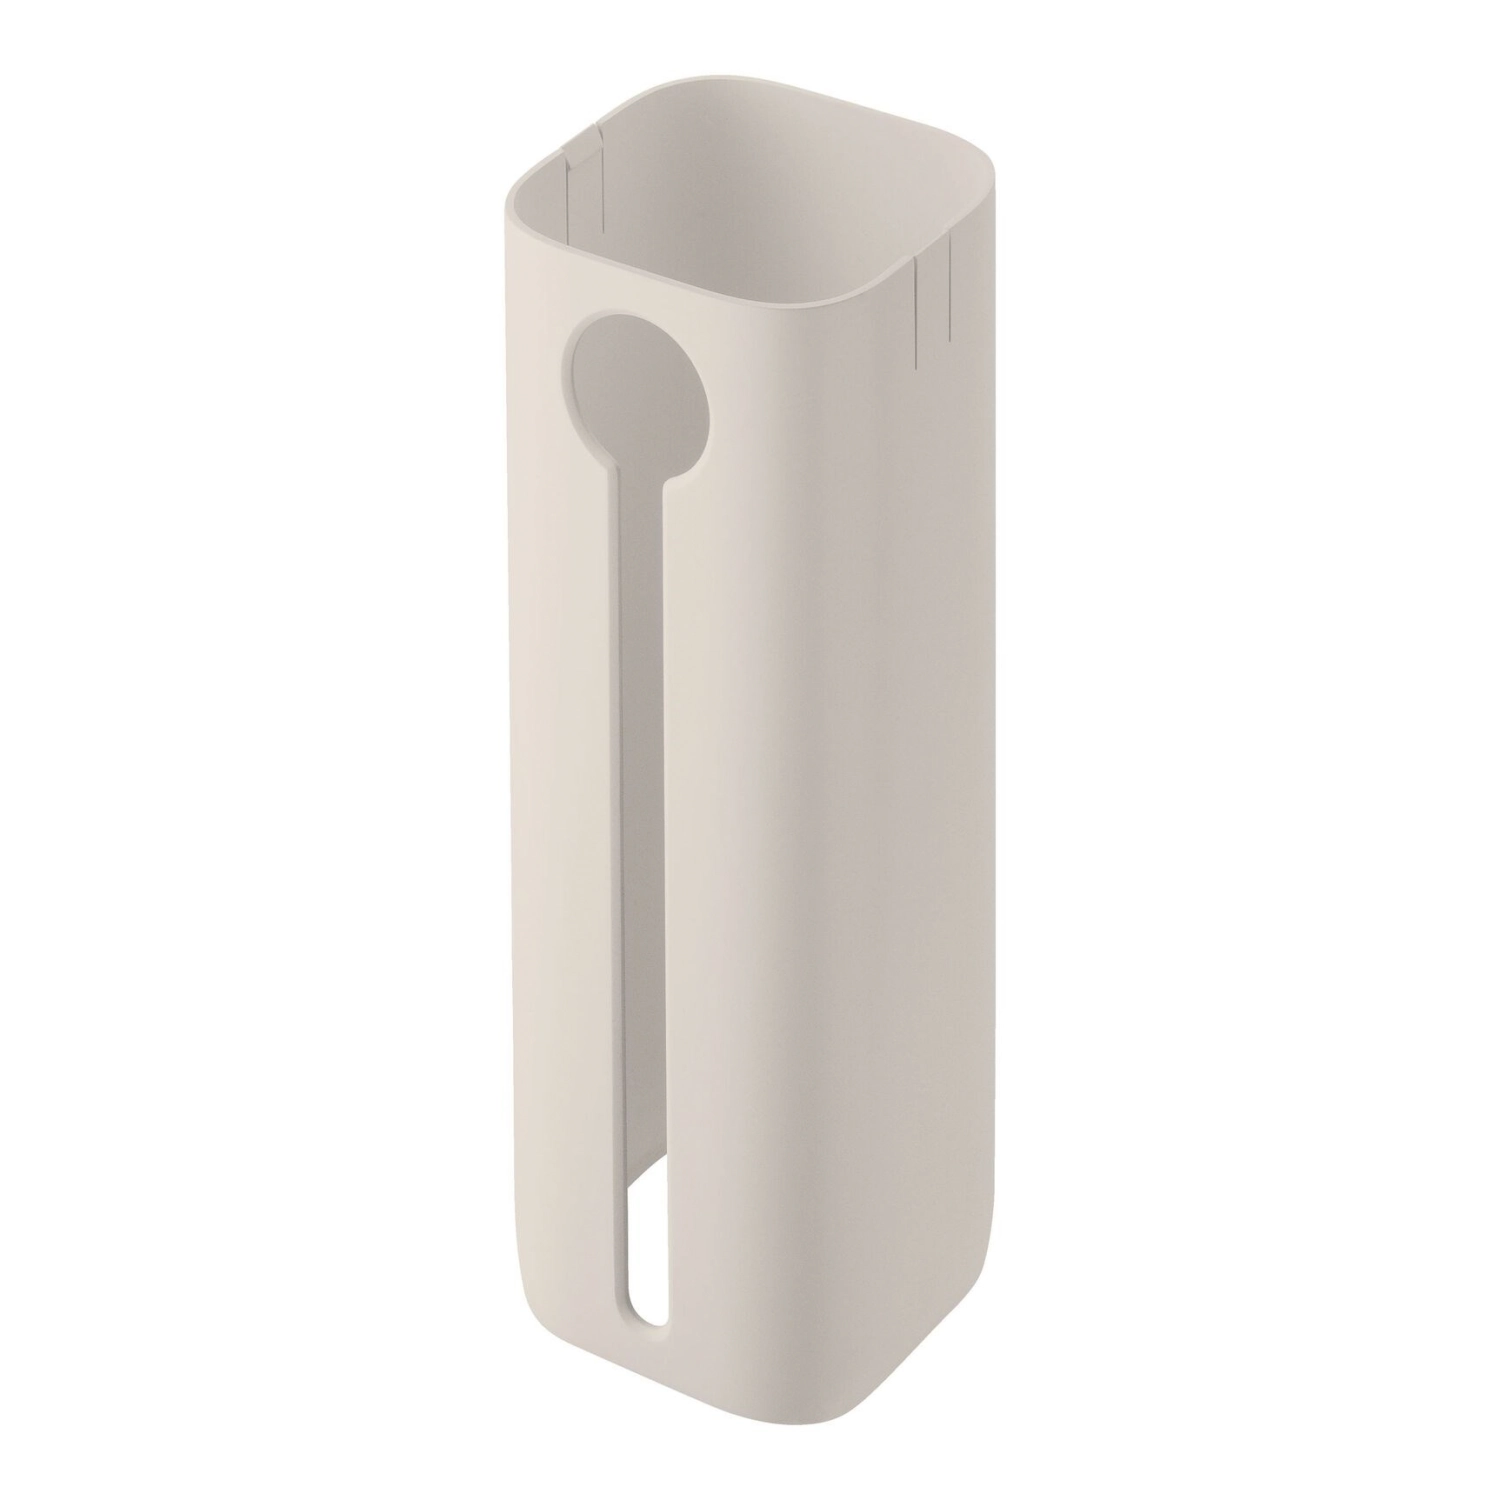 Cube cover 4s, ivoire blanc